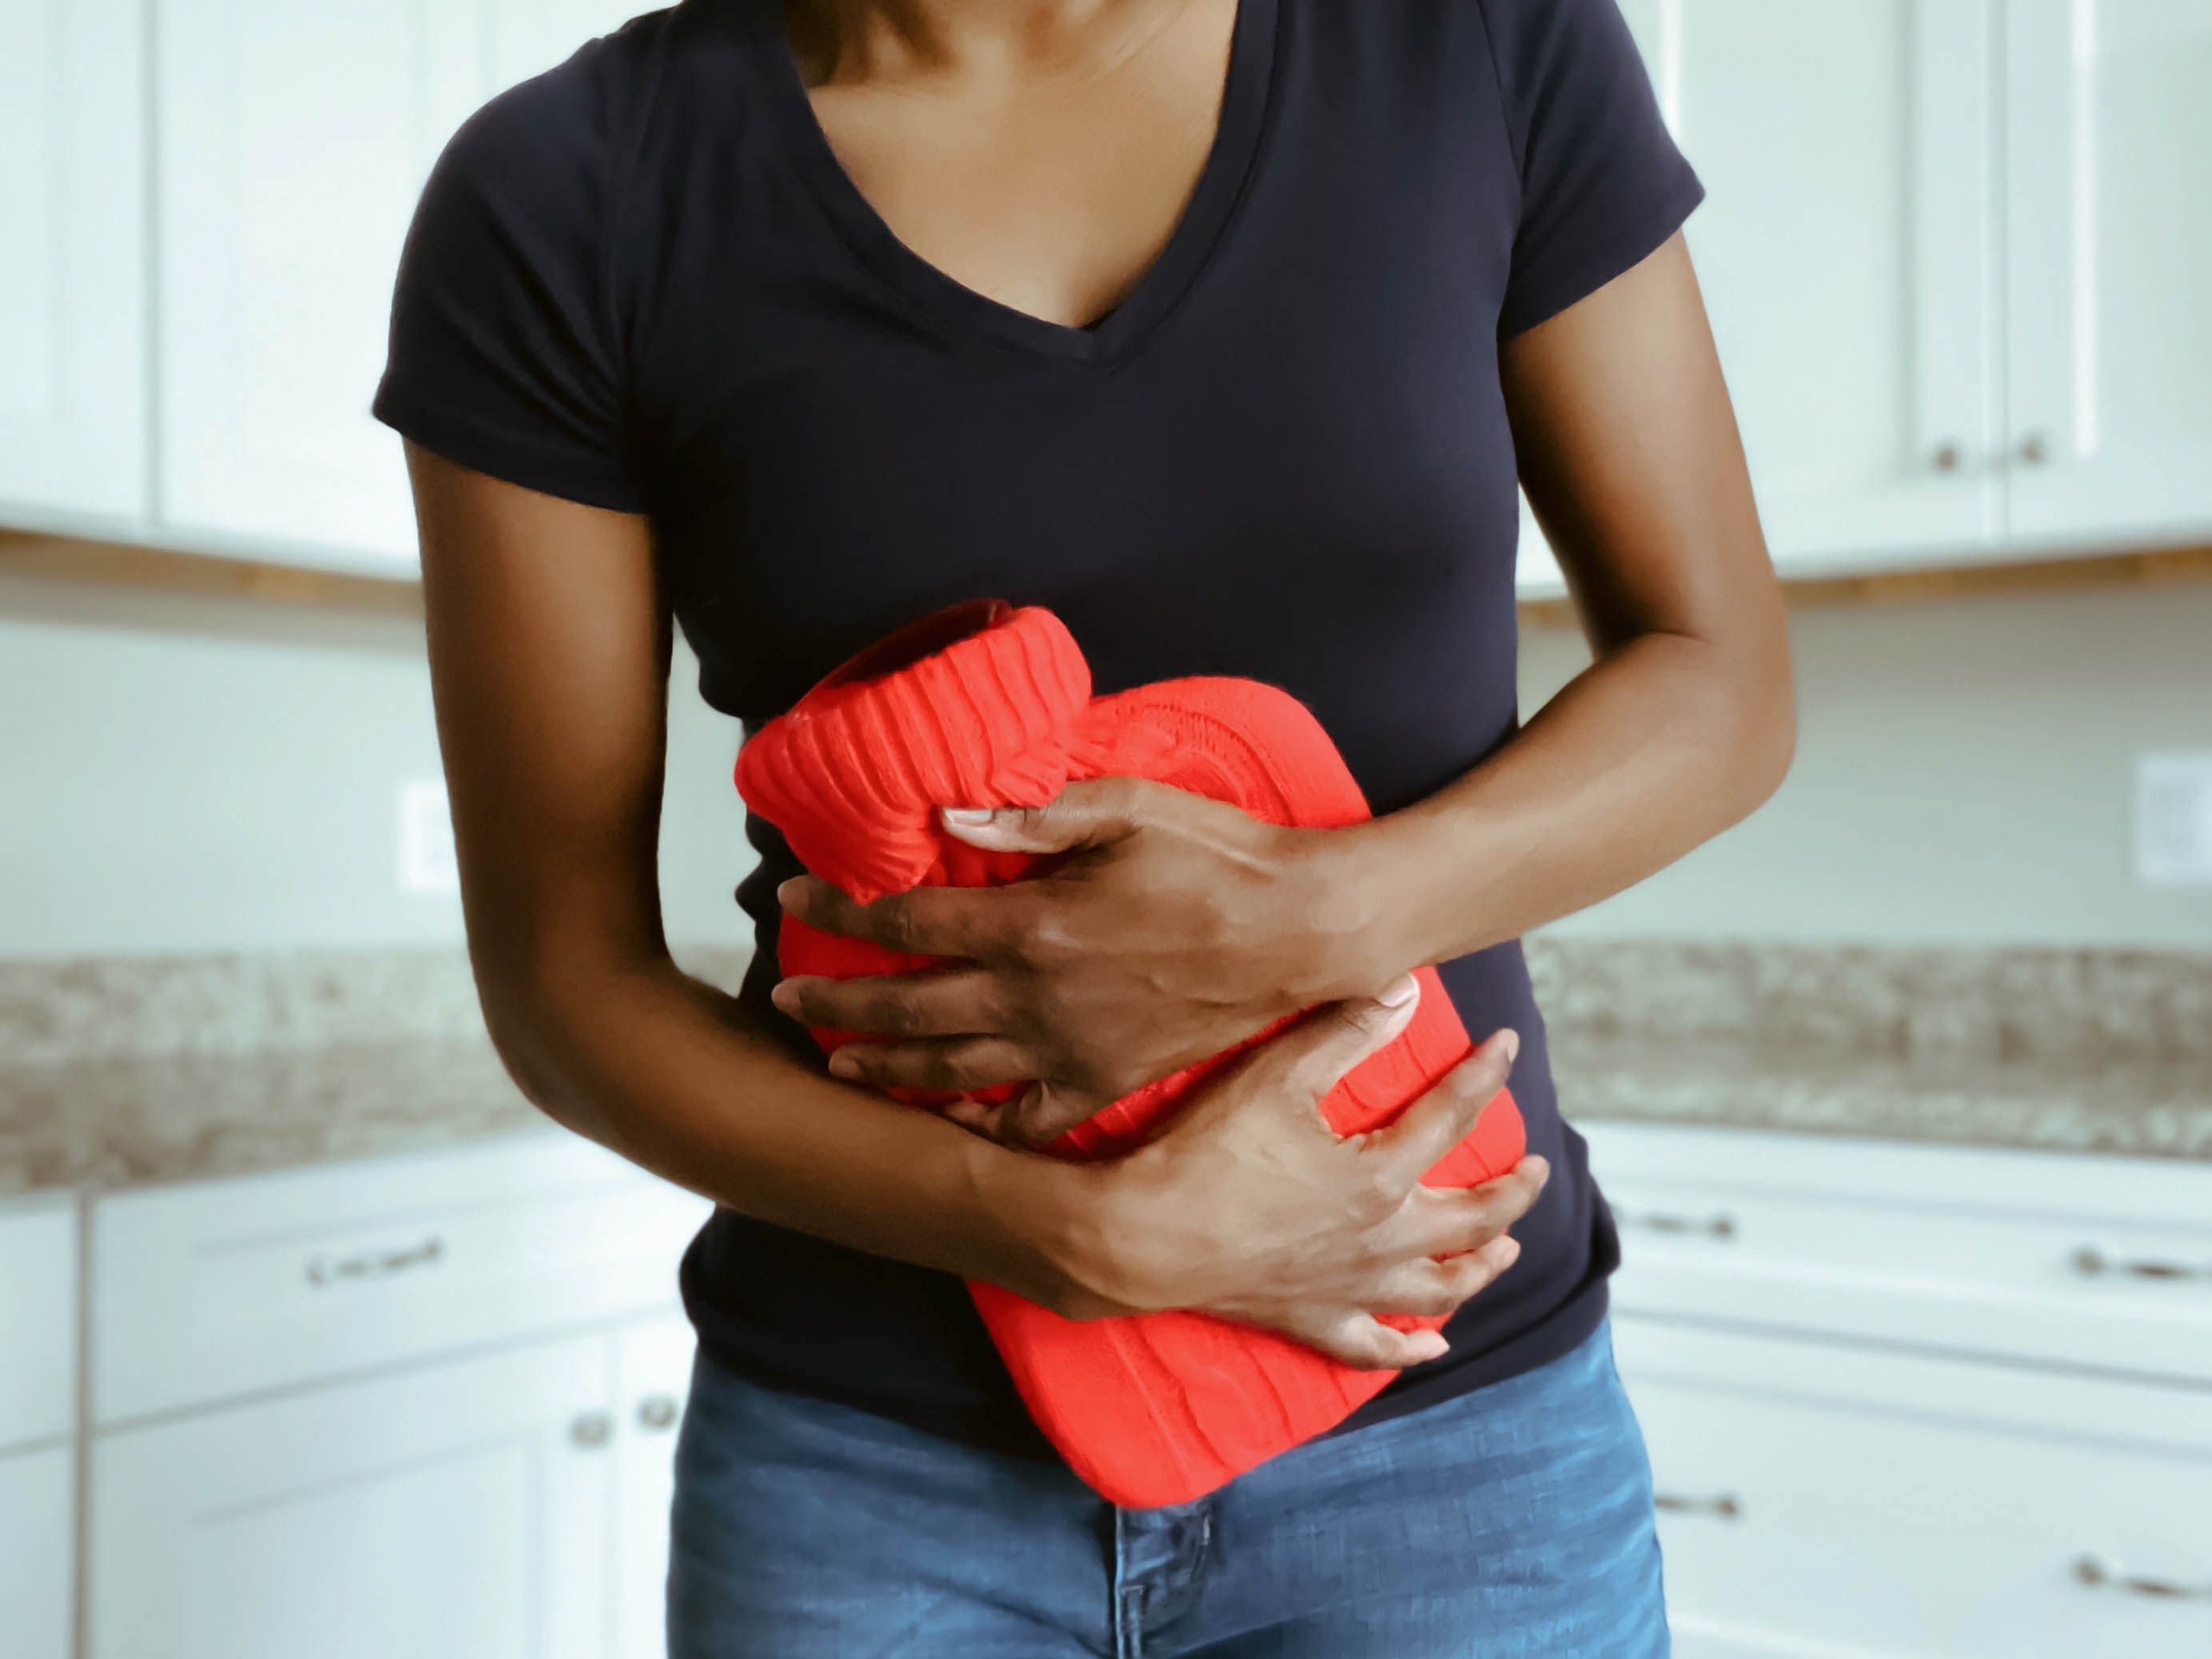 Menstrual cramps: Symptoms, treatment, and causes